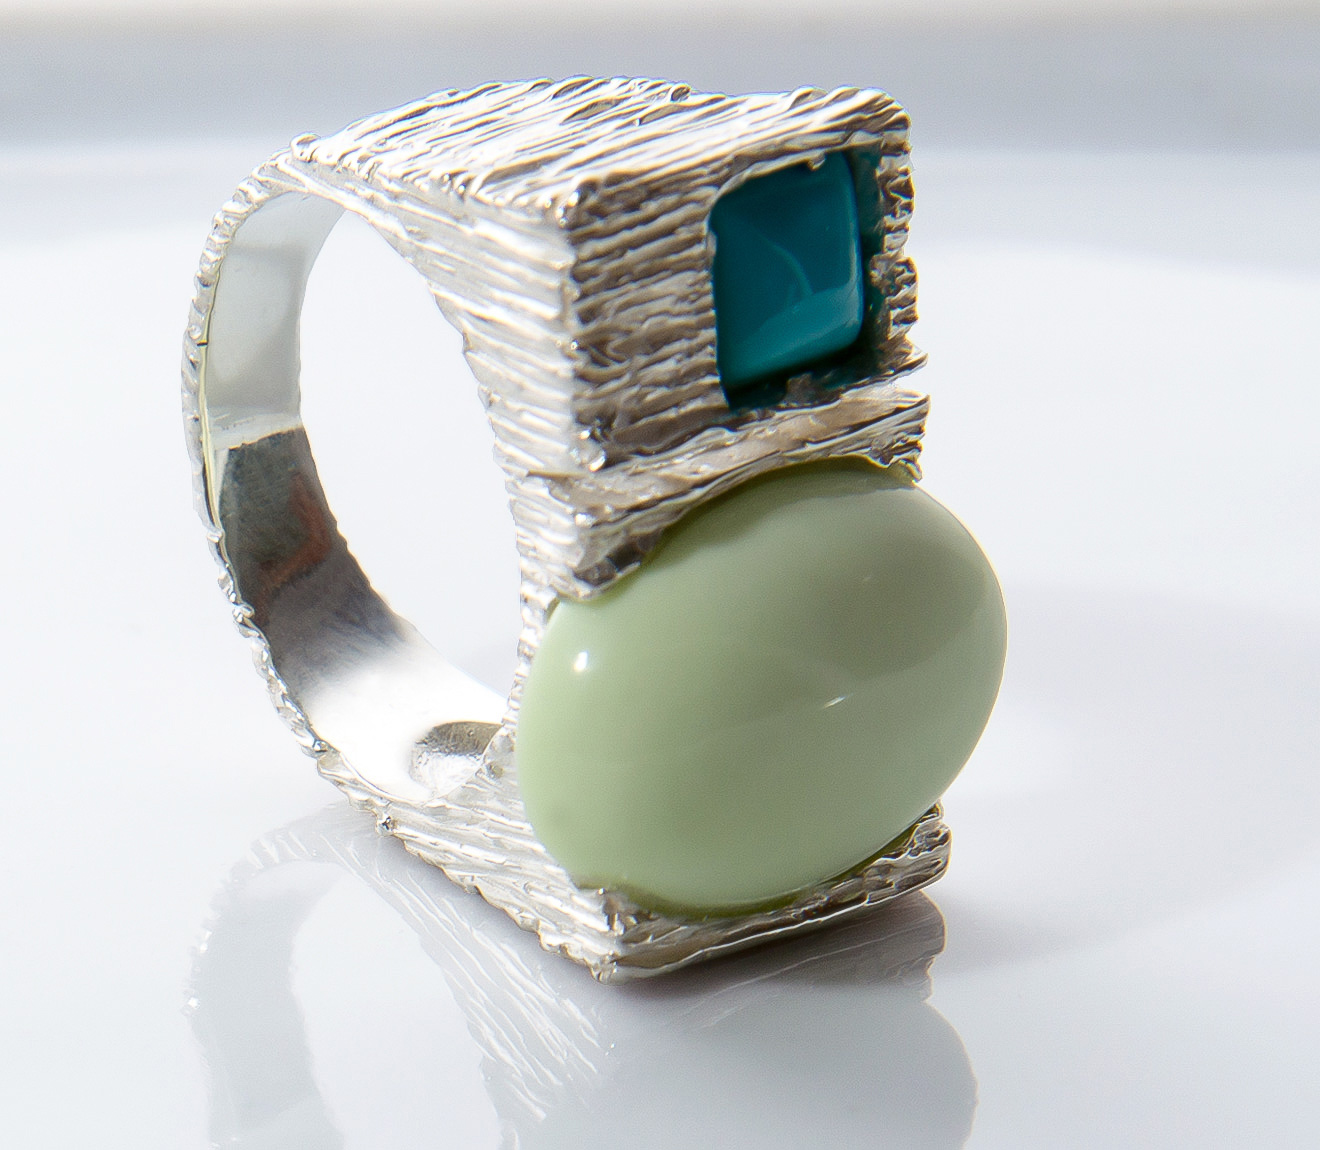 Rectangular ring,close up perspective view,crisolemon,turquoise